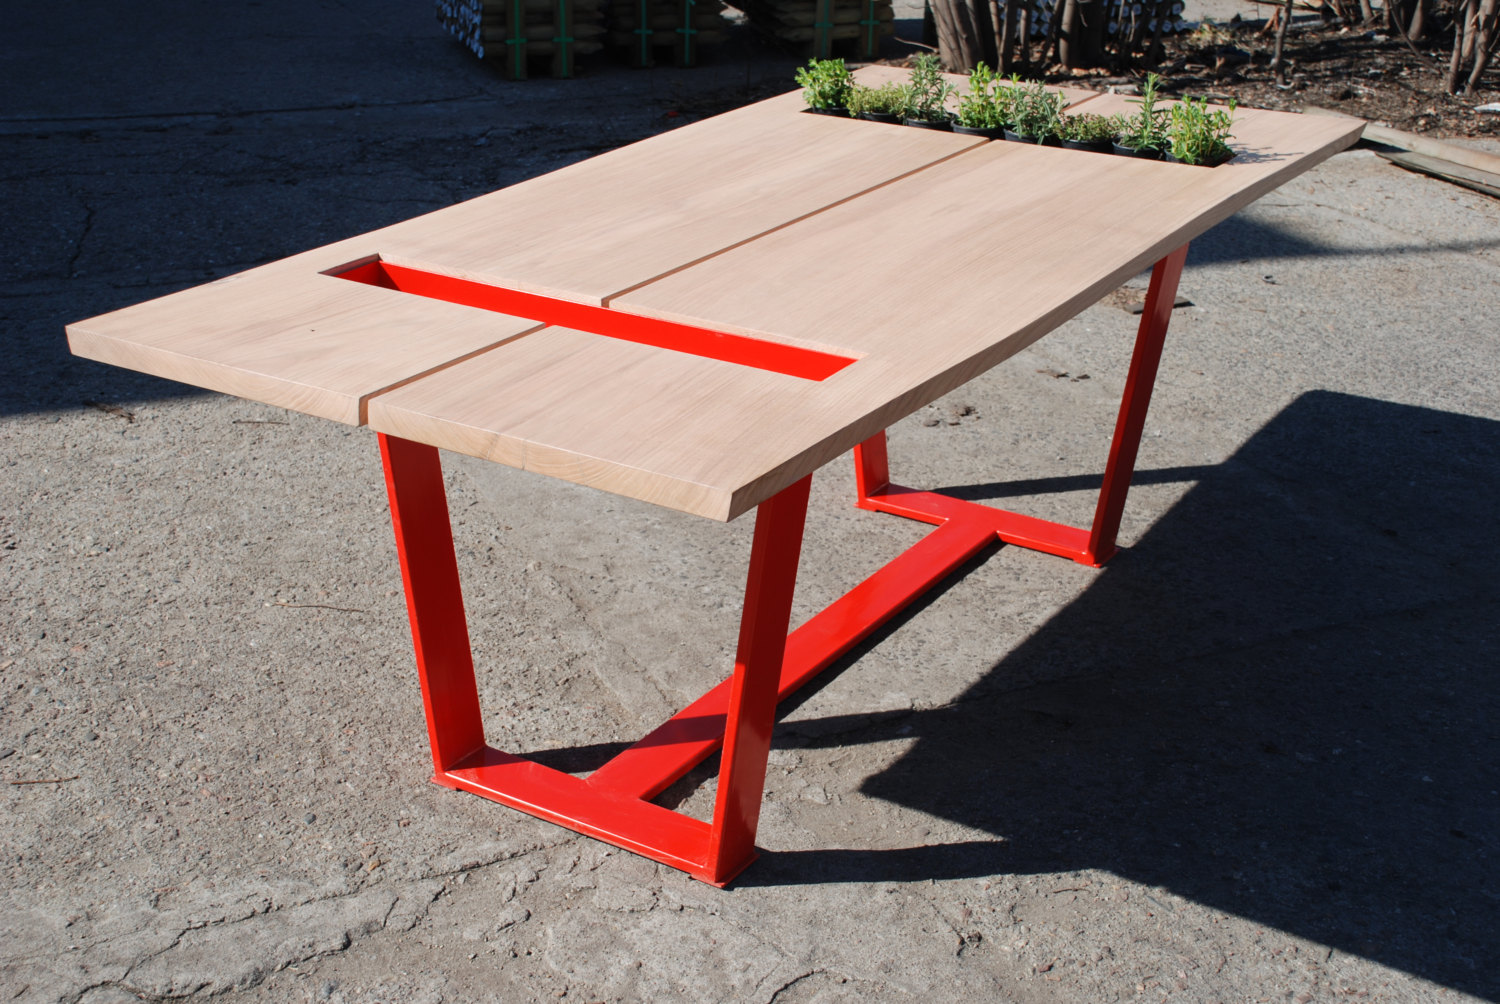 Handmade Dining Room Tables For Design Enthusiasts Hunting Handmade